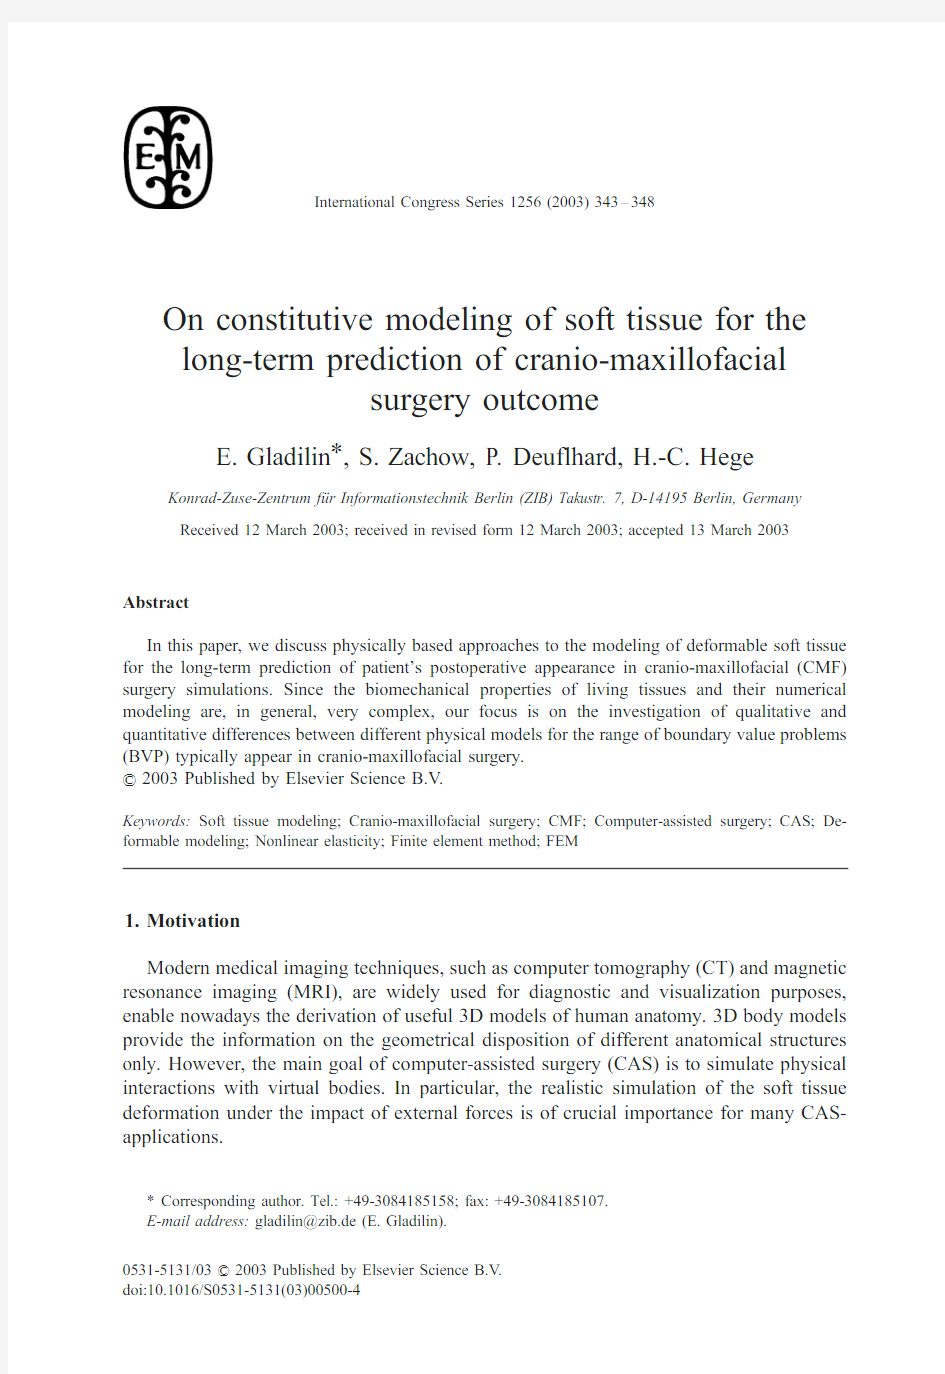 On constitutive modeling of soft tissue for the long-term prediction of cranio-maxillofacial surgery